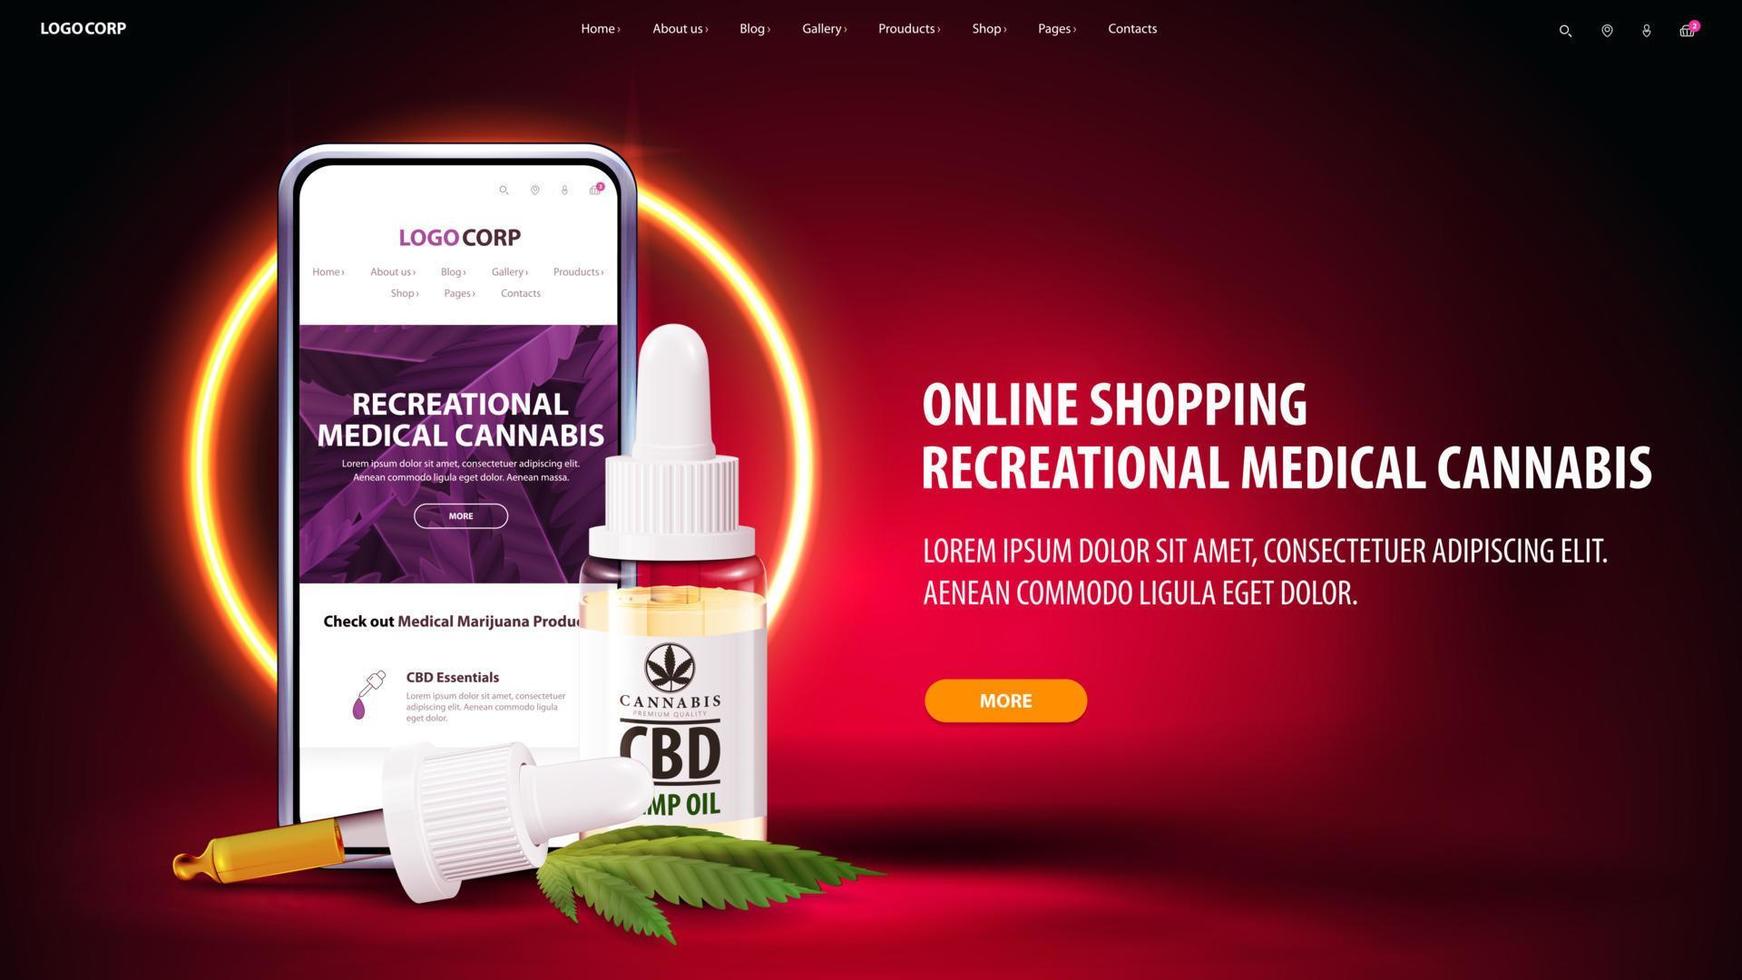 Online shopping of recreational medical cannabis, red banner for website with button, CBD oil bottle with pipette and yellow neon ring on background vector